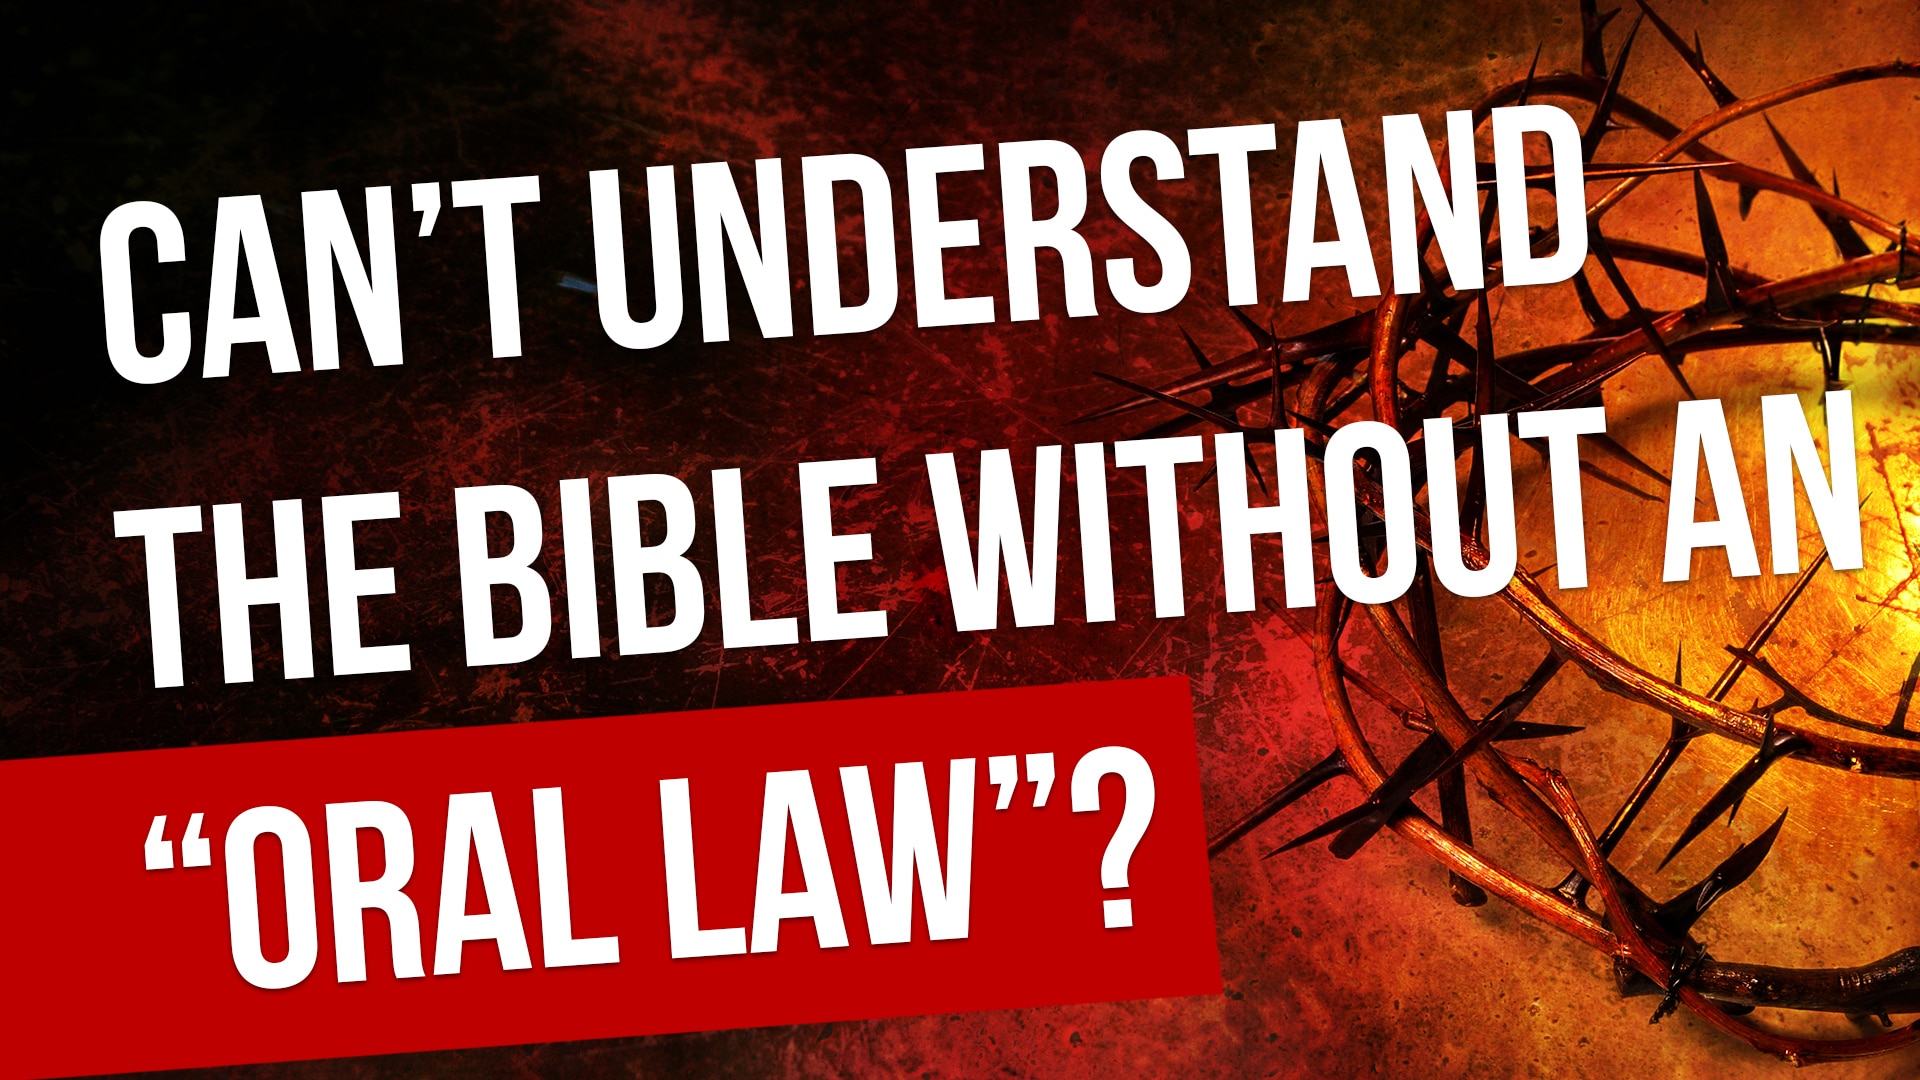 So do we really depend on the rabbinical tradition, "The Oral Law", in order to understand the written law?